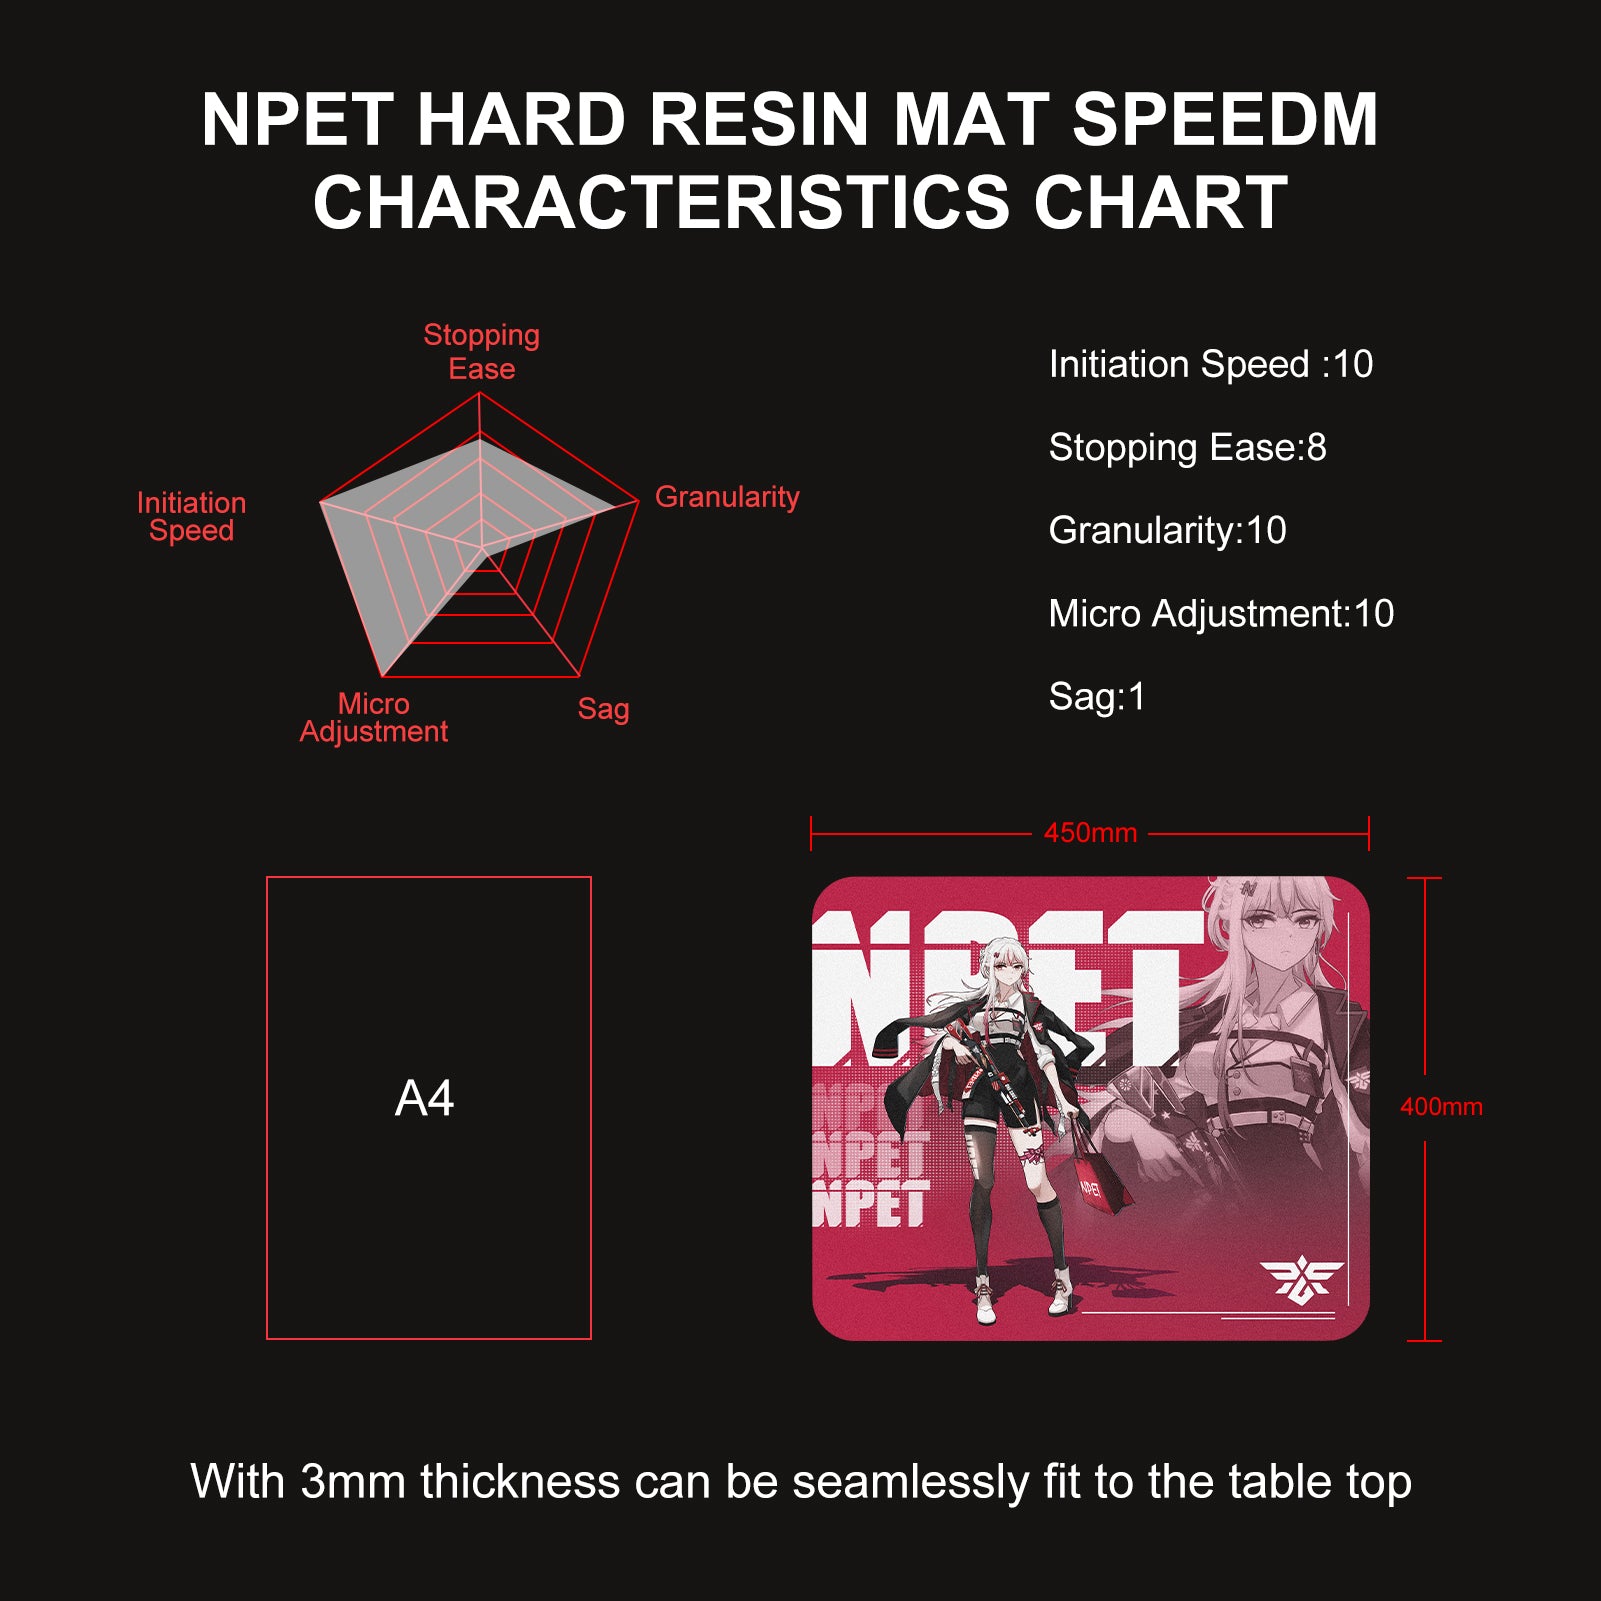 NPET SPEEDM Gaming Mousepad - Resin Surface Hard Gaming Mouse pad,Balanced Control & Speed, No Smell Waterproof Mouse Mat for Esports Gamers [Hard/Fast] Pink, Large